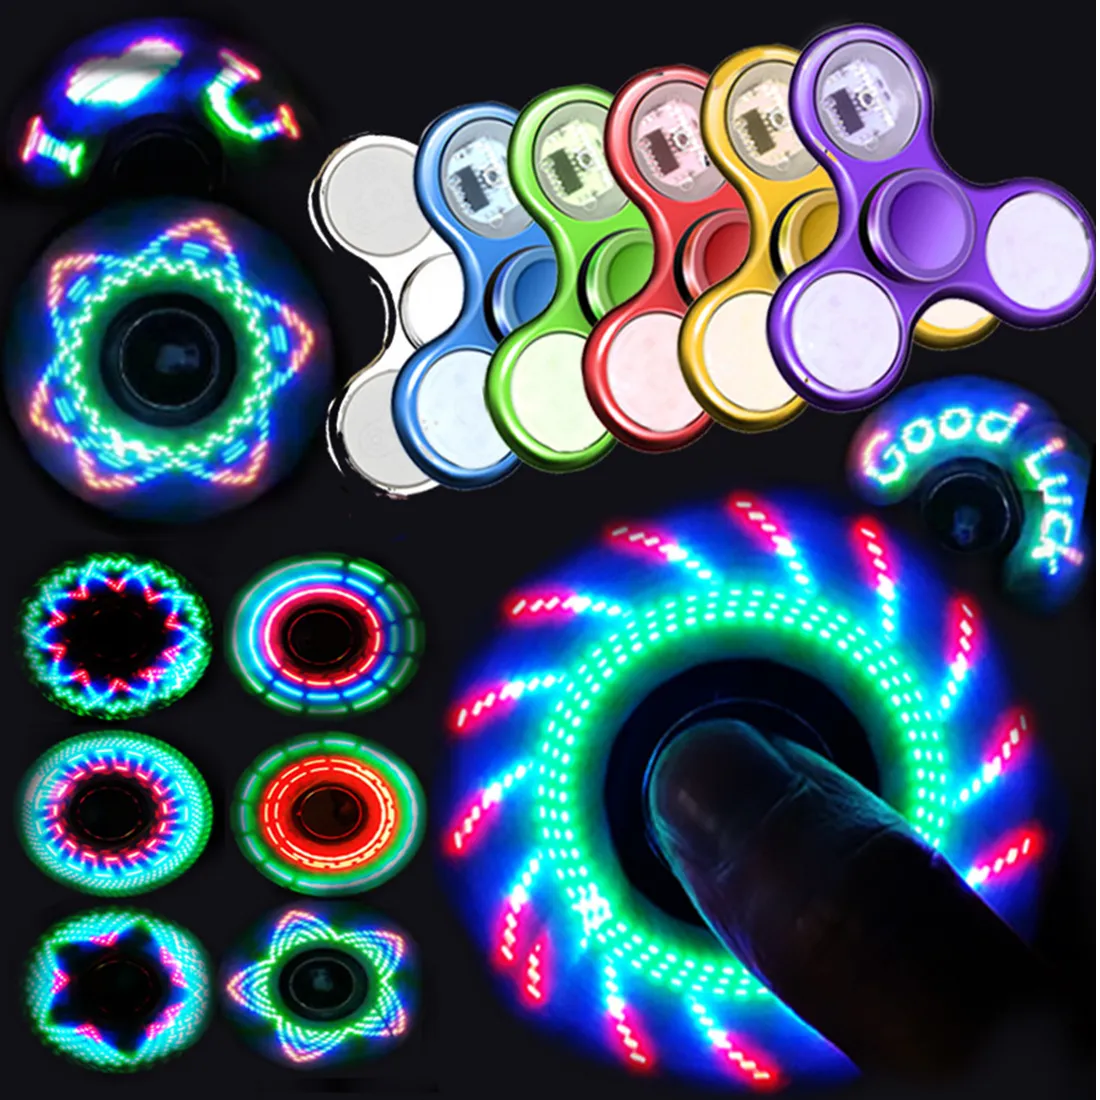 LED Light Fidget Spinner Toys Electroplating Spinning Top Hand Fingertip Spinners Tri Gyro Luminous Spiral Finger Decompression Toy for Kids Adult Gift